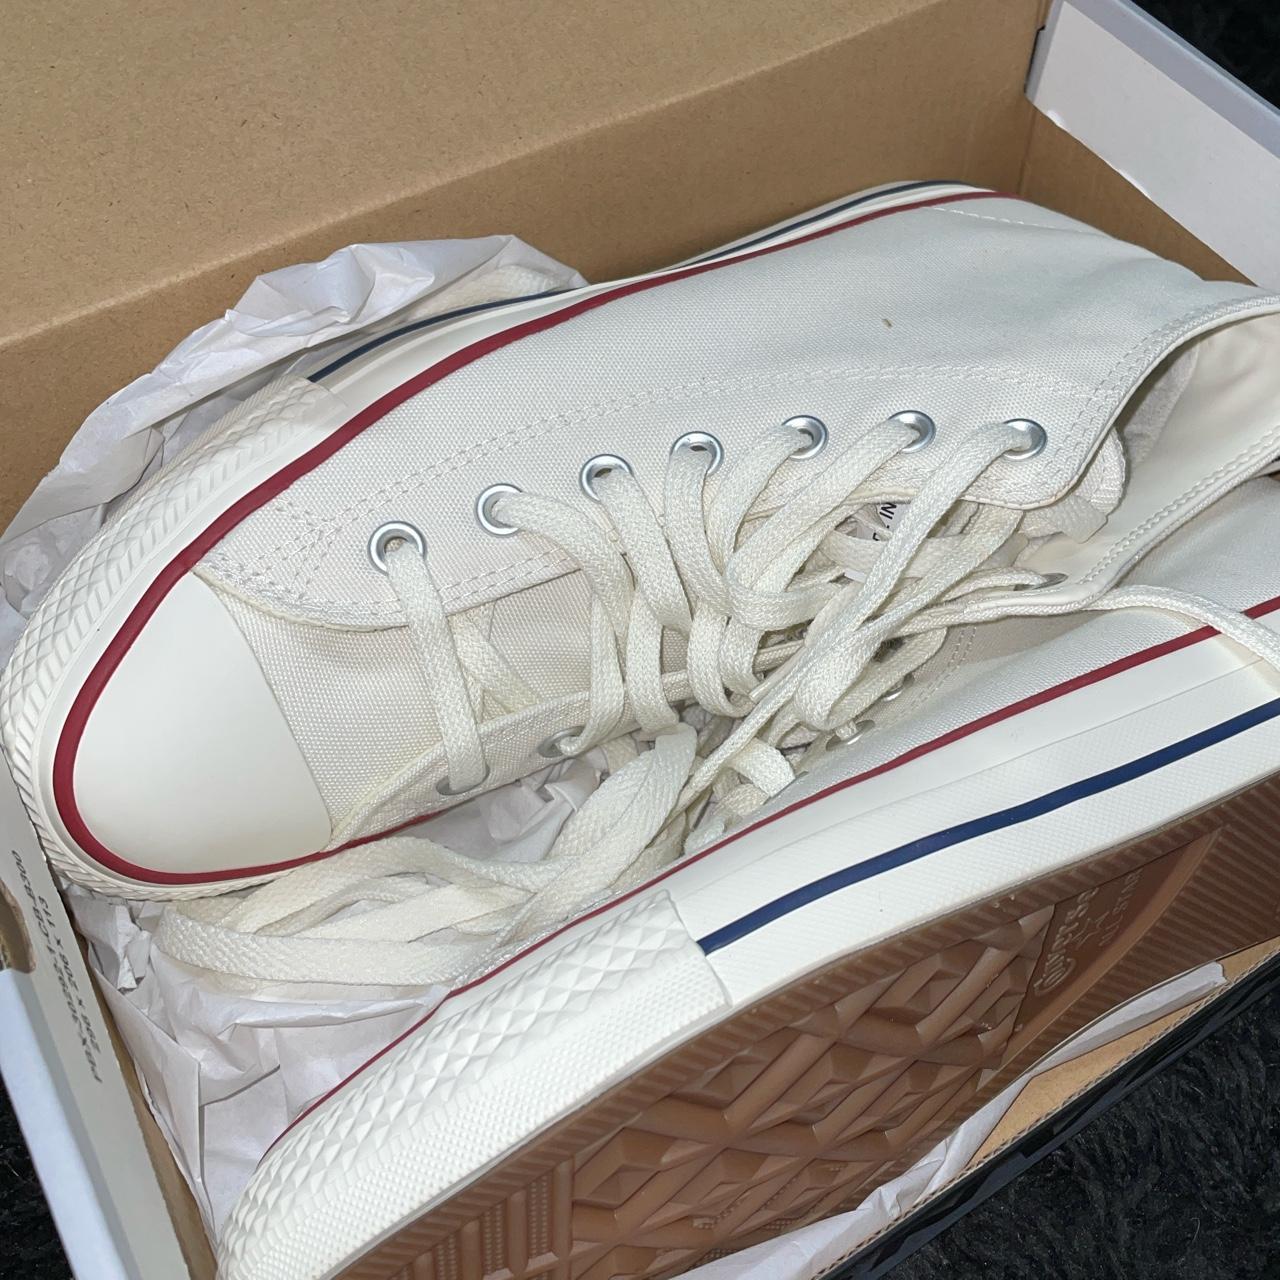 Converse Chuck Taylor All Star Pro White Mid Top... - Depop